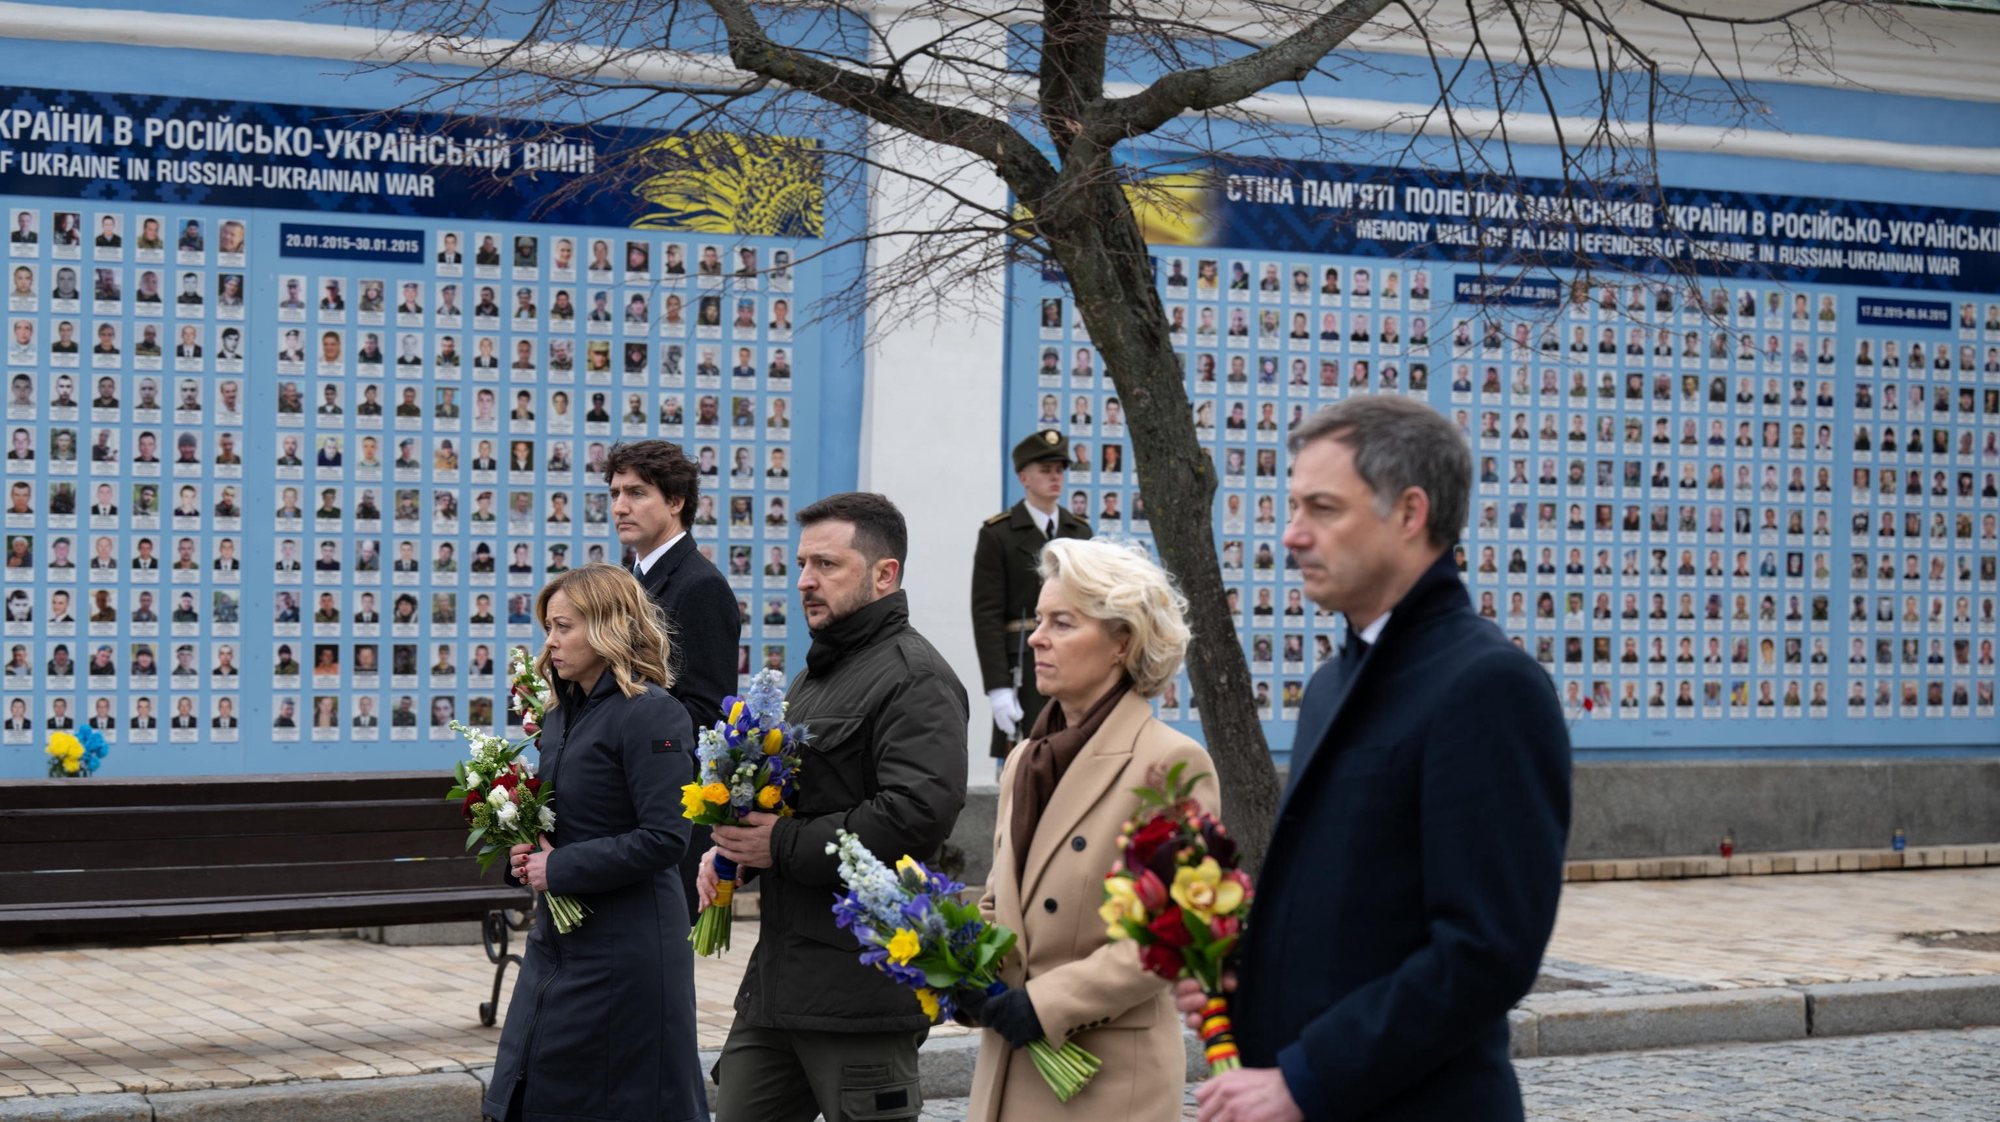 epa11177218 A handout photo made available by the Italian government press office shows (L-R) Canadian Prime Minister Justin Trudeau, Italian Prime Minister Giorgia Meloni, Ukrainian President Volodymyr Zelensky, President of the European Commission Ursula von der Leyen, and  Prime Minister of Belgium Alexander De Croo attending a wreath laying ceremony ahead of Italy&#039;s first meeting of G7 Heads of State and Government in its presidency, on the second anniversary of the Russian invasion of Ukraine, in Kyiv (Kiev), Ukraine, 24 February 2024. On 24 February 2024, Ukraine marks the second year since Russian troops entered its territory, starting a conflict that has provoked destruction and a humanitarian crisis.  EPA/FILIPPO ATTILI / ITALIAN GOVERNMENT PRESS OFFICE / HANDOUT  HANDOUT EDITORIAL USE ONLY/NO SALES HANDOUT EDITORIAL USE ONLY/NO SALES